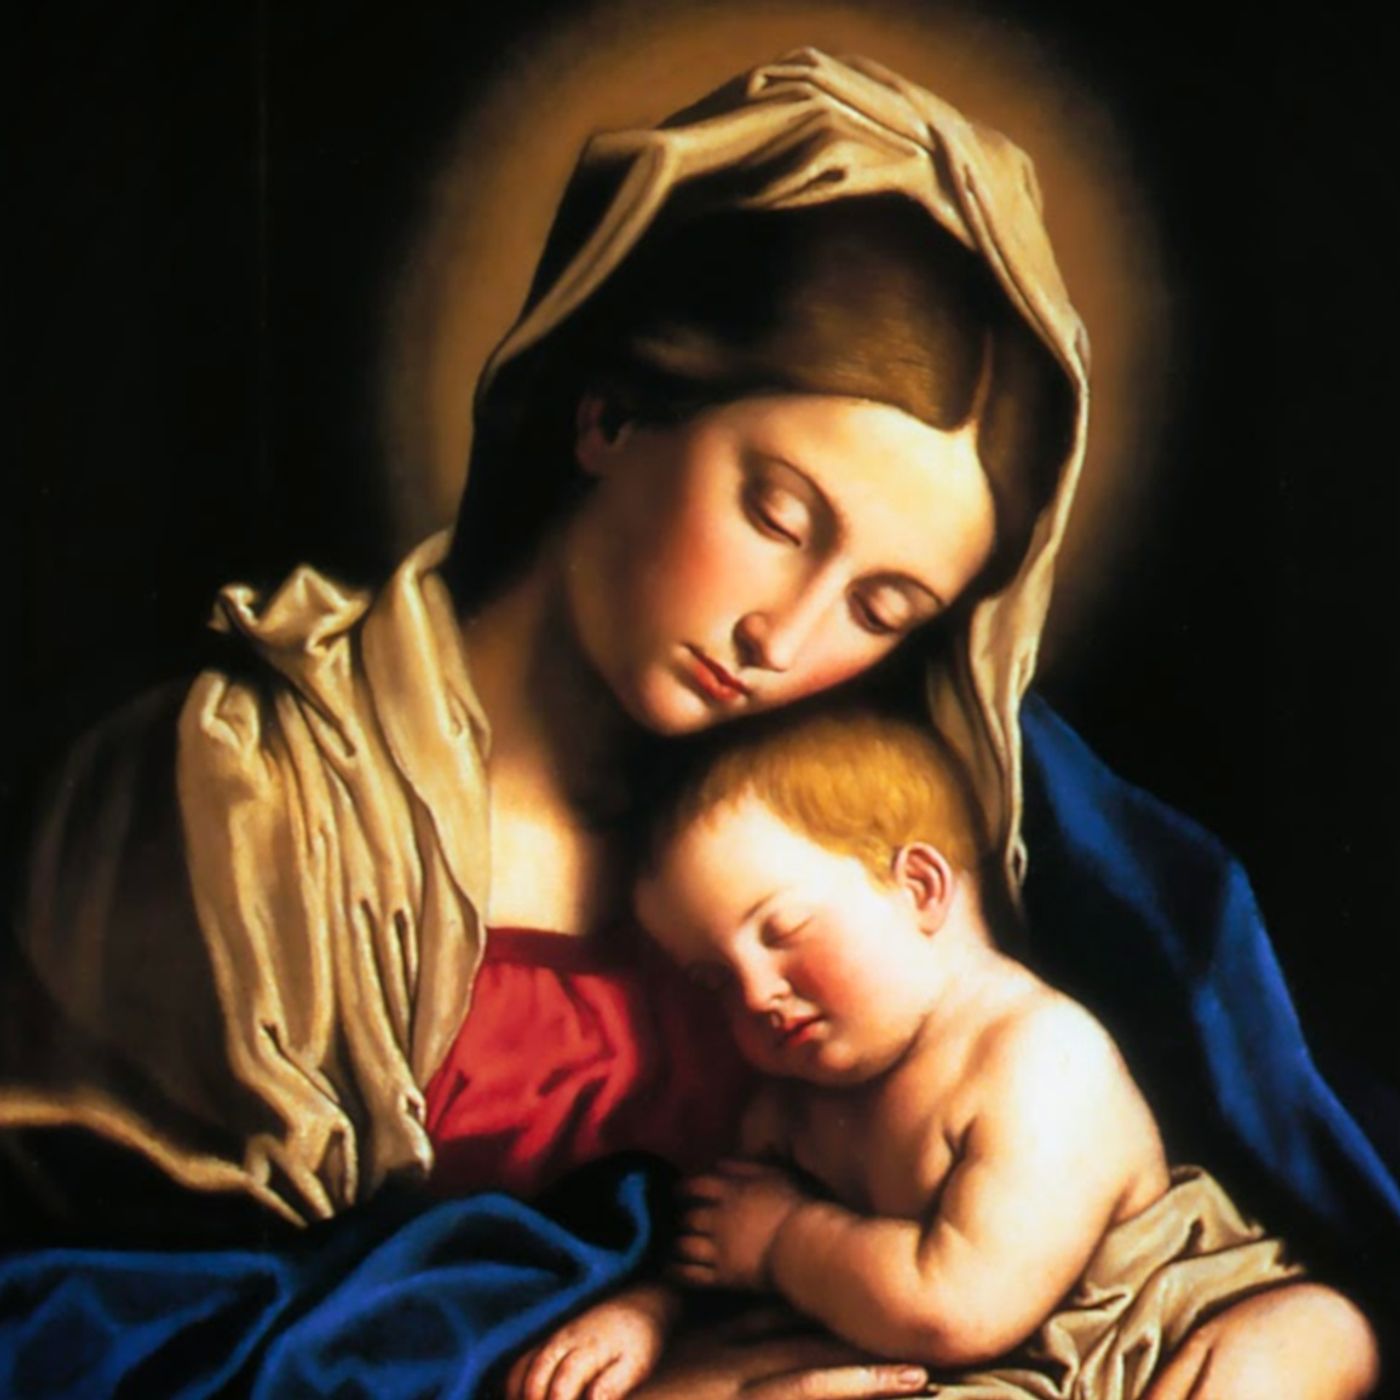 January 1: Solemnity of Mary, the Mother of God